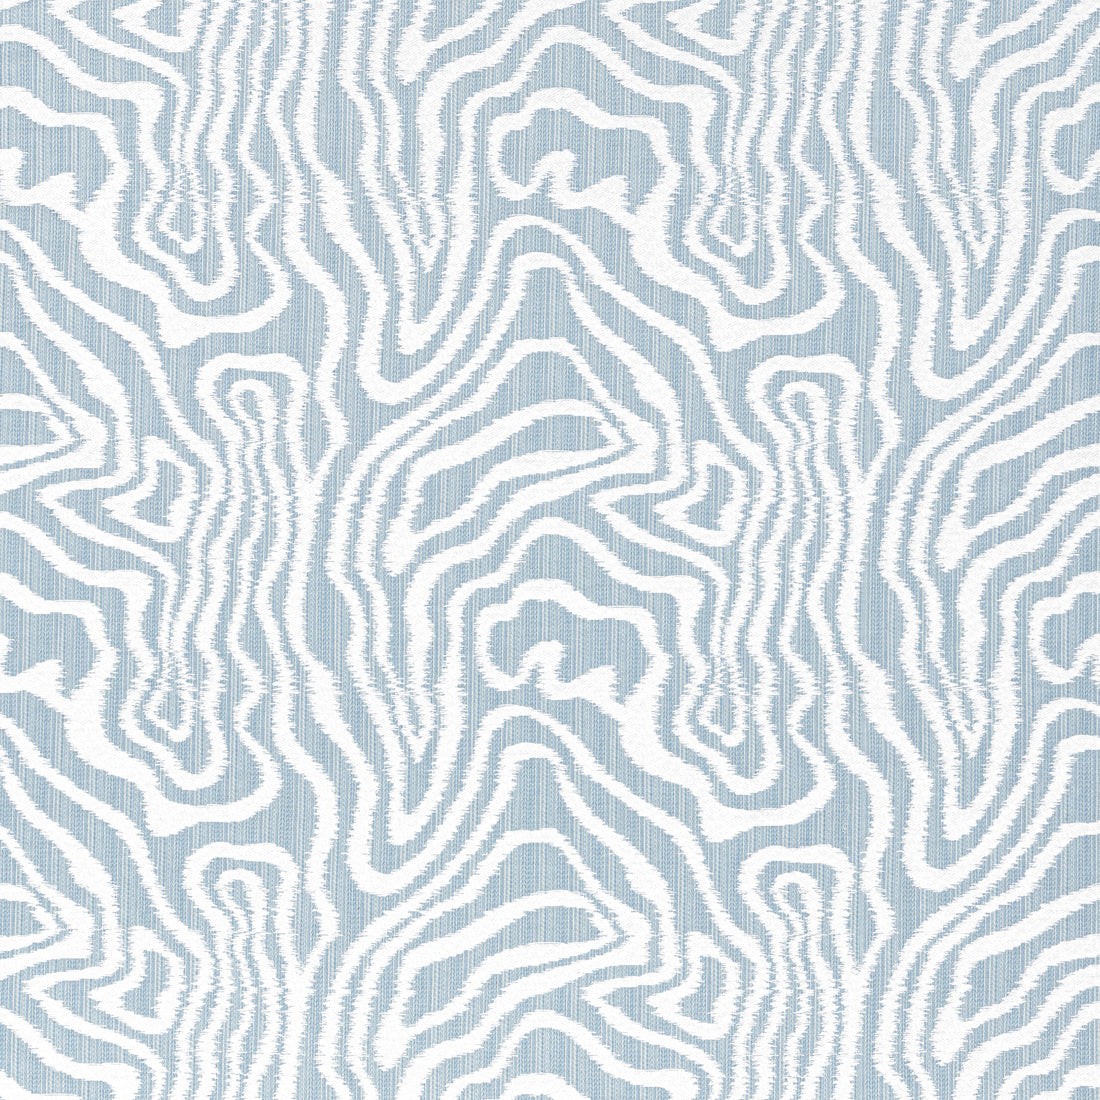 Alessandro fabric in spa blue - pattern number W713608 - by Thibaut in the Grand Palace collection